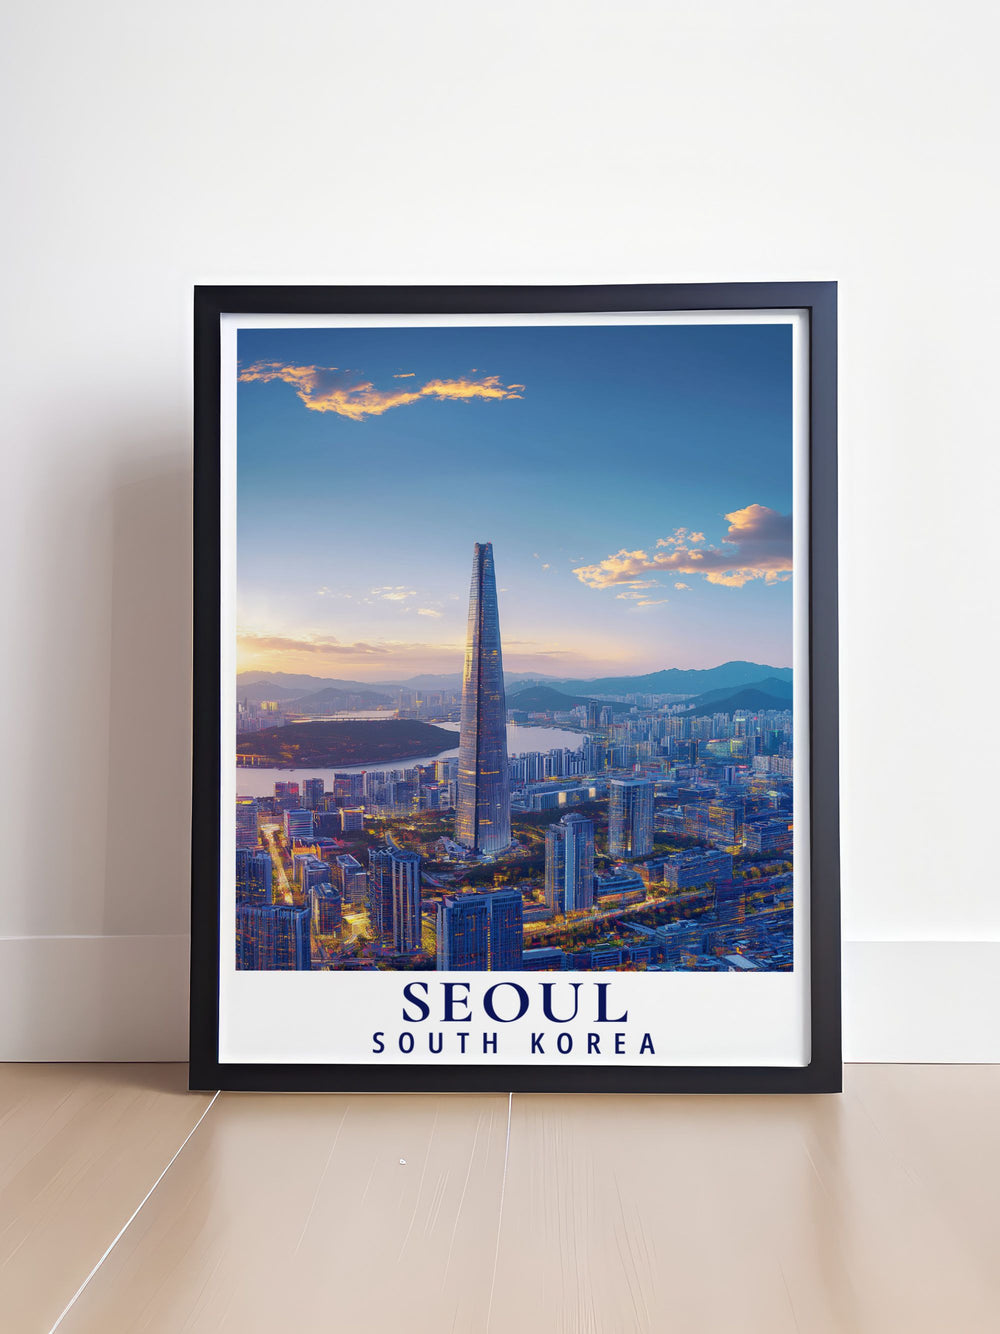 The Lotte World Tower and Seouls bustling cityscape are beautifully depicted in this poster, celebrating the iconic landmarks and architectural advancements of South Korea, ideal for urban enthusiasts.